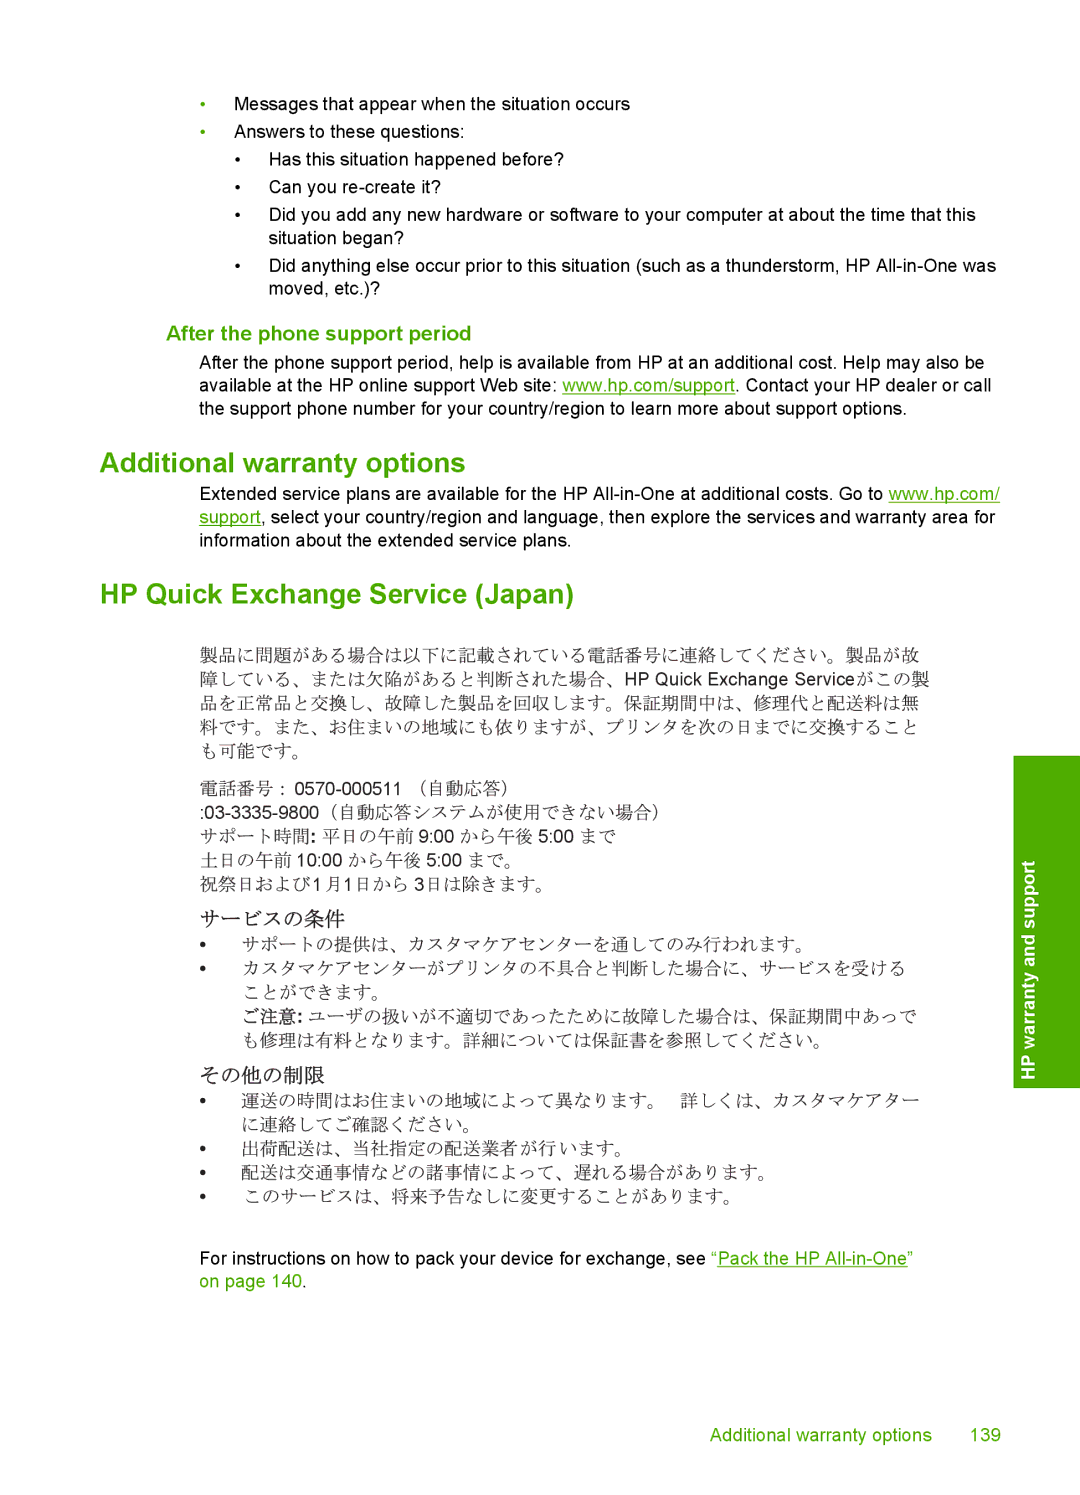 HP C4210, C4283, C4280, C4288 Additional warranty options HP Quick Exchange Service Japan, After the phone support period 